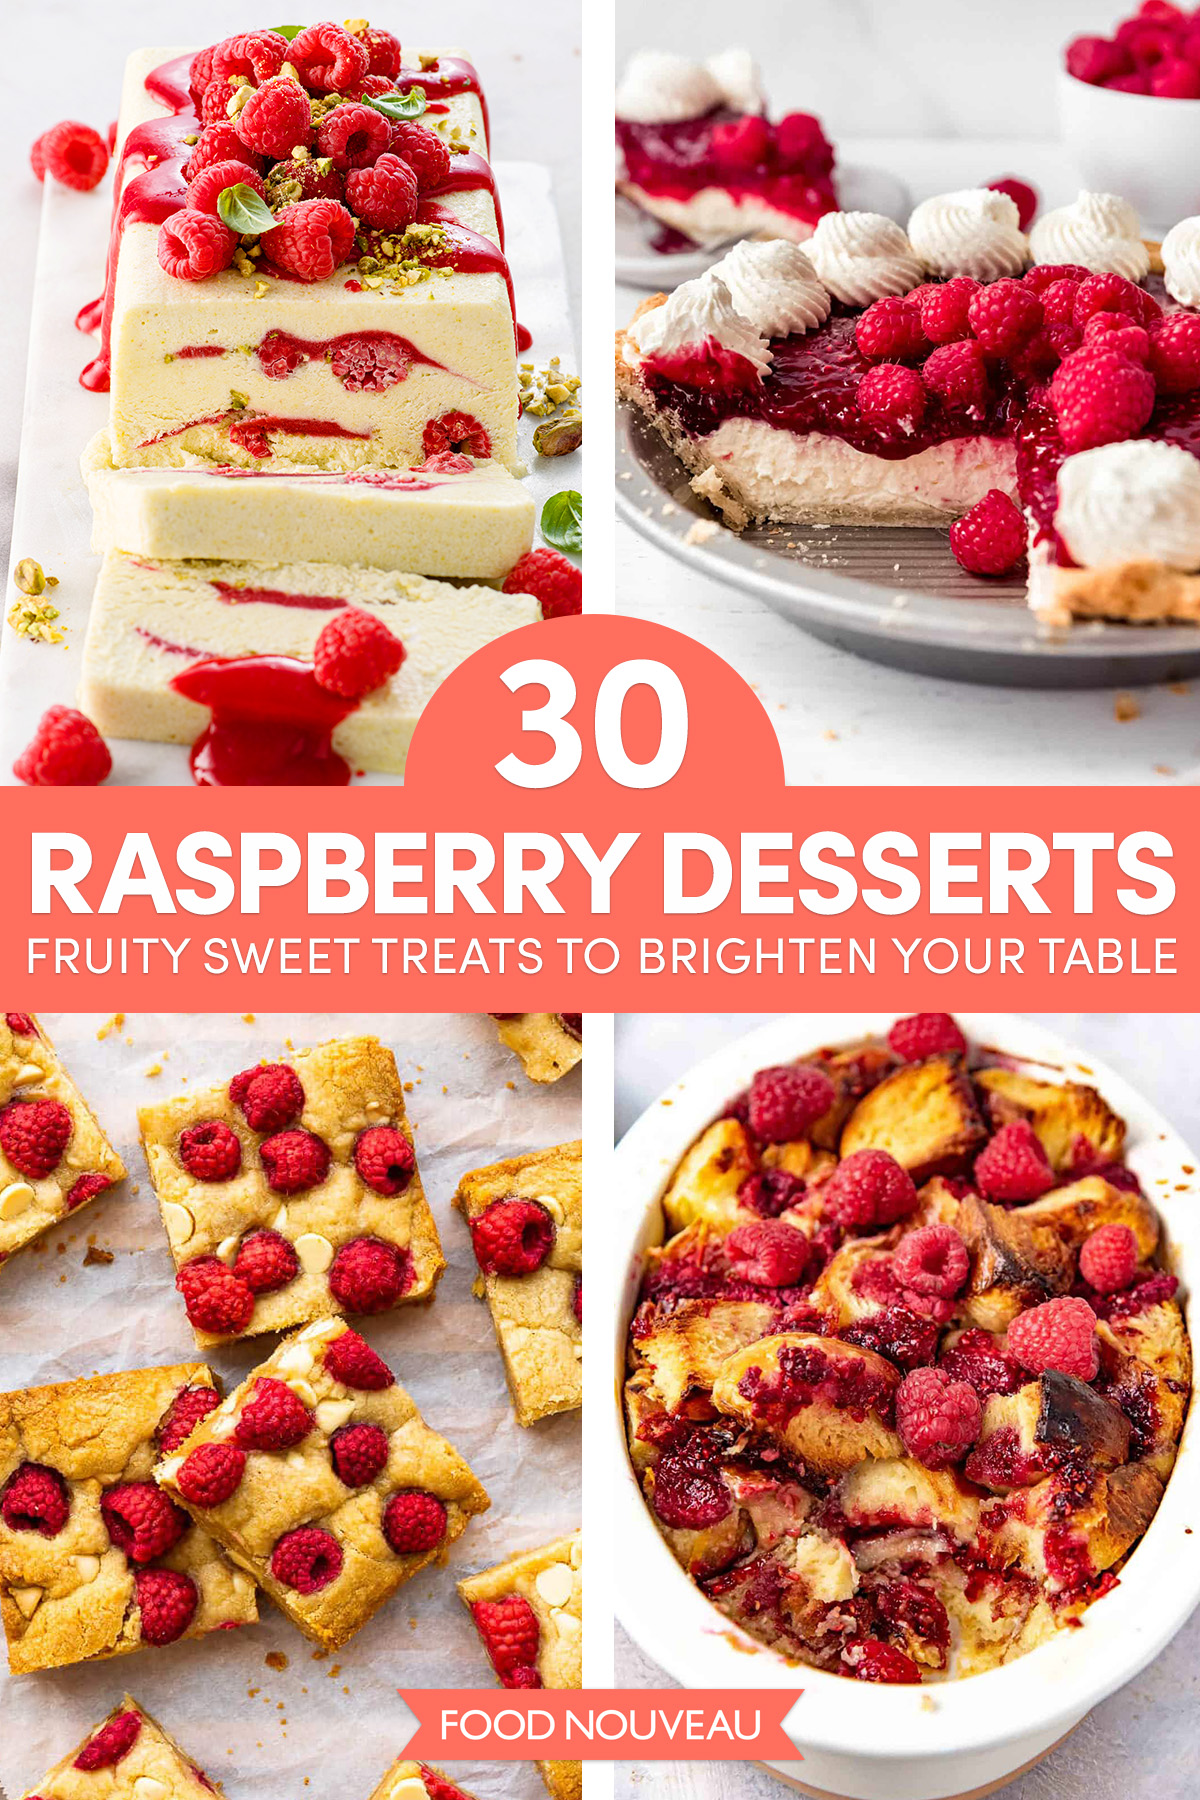 30 Raspberry Dessert Recipes and Treats to Brighten Your Table // FoodNouveau.com